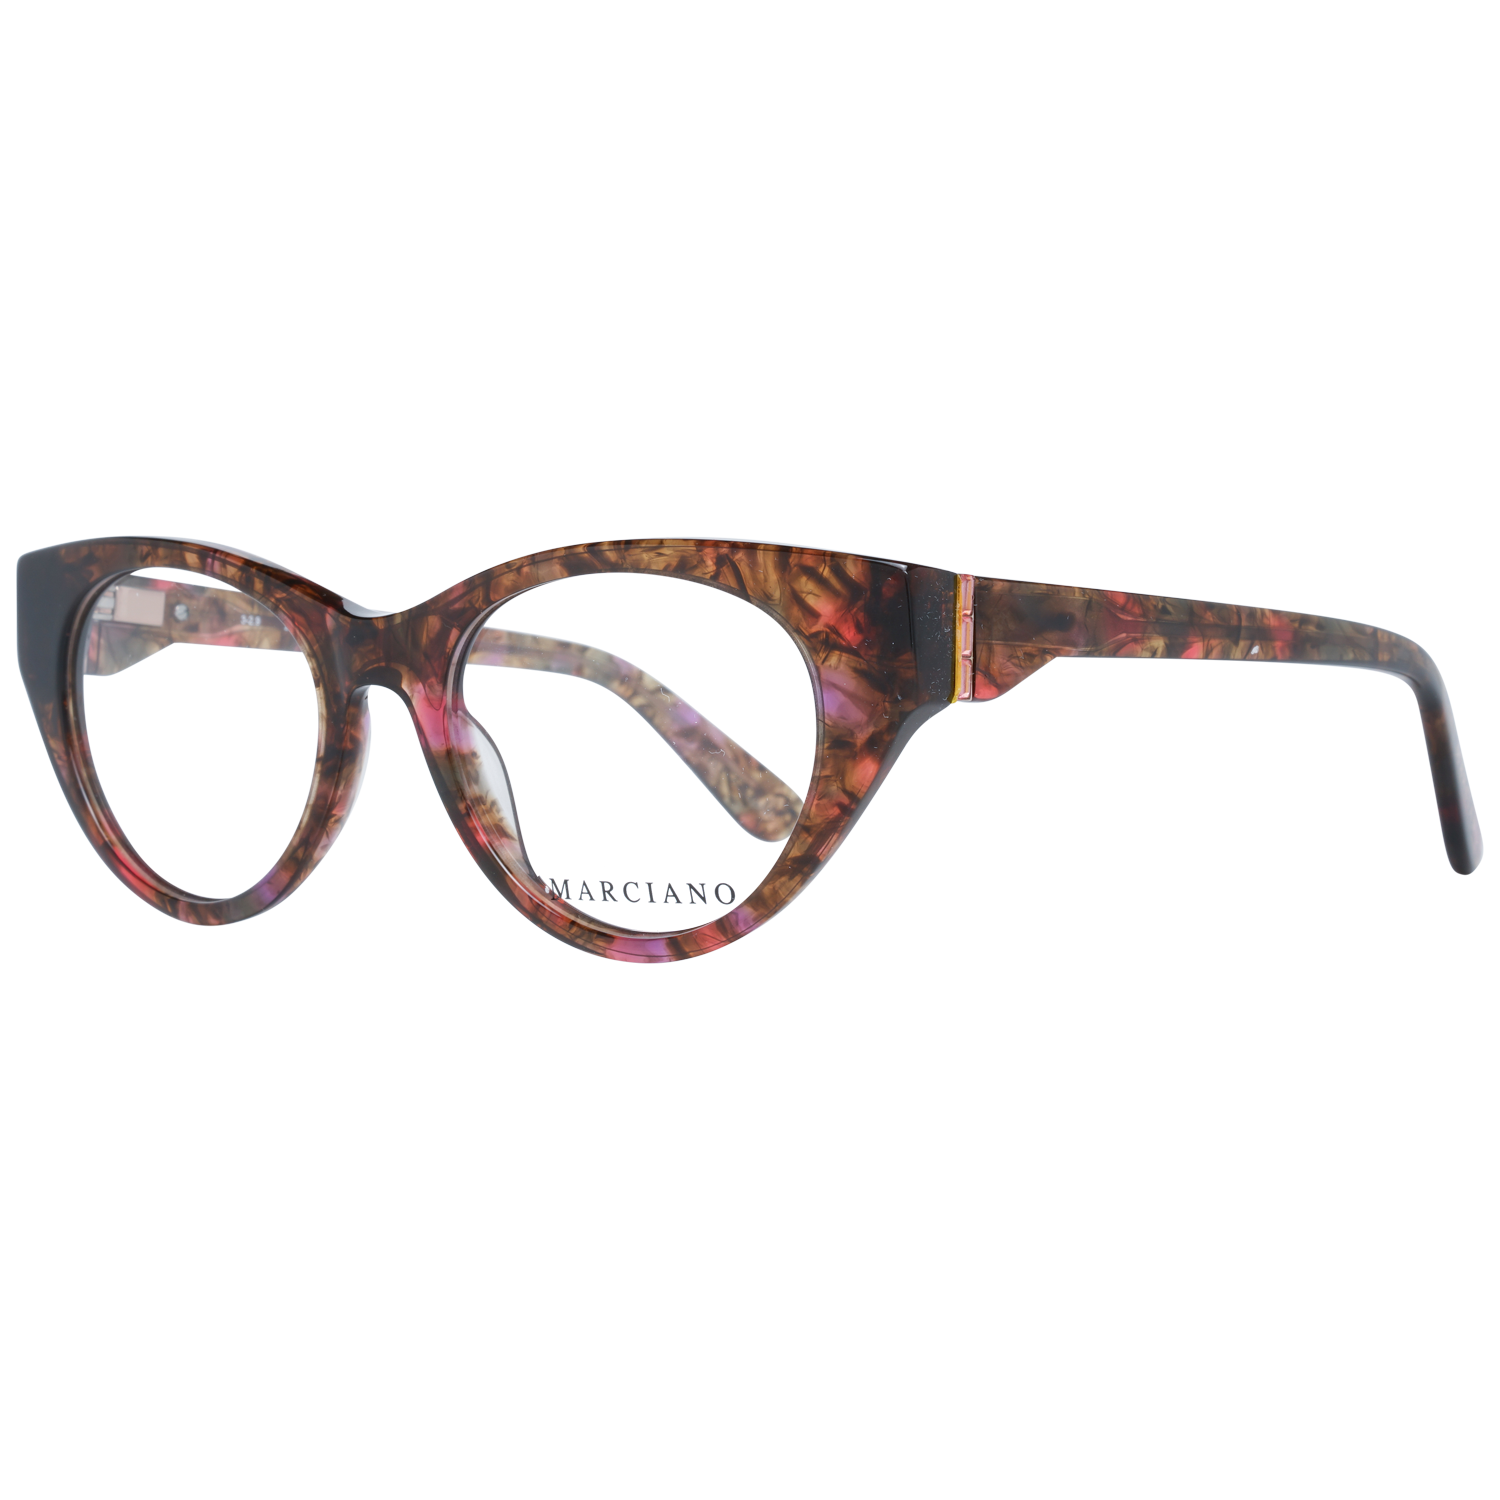 Marciano by Guess Frames Marciano by Guess Glasses Frames GM0362-S 074 49 Eyeglasses Eyewear UK USA Australia 